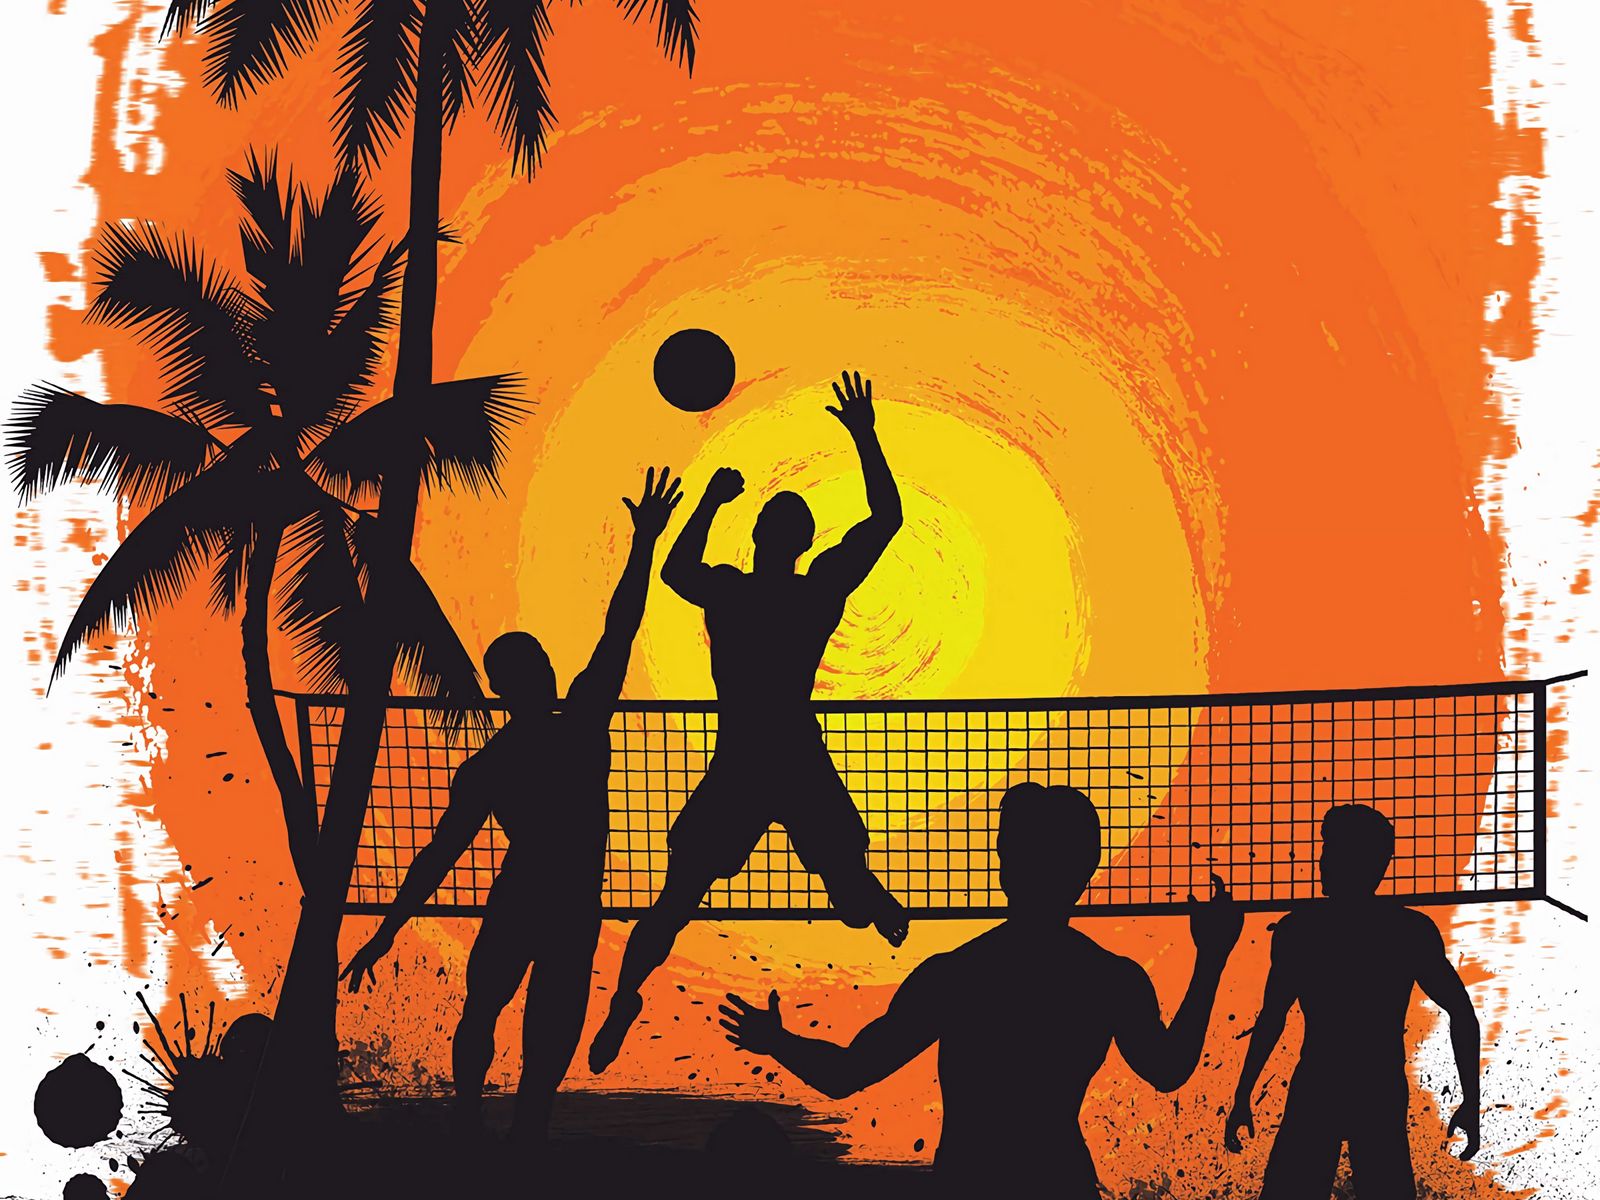 Download wallpaper 1600x1200 volleyball, silhouettes, sun, palm trees, art  standard 4:3 hd background